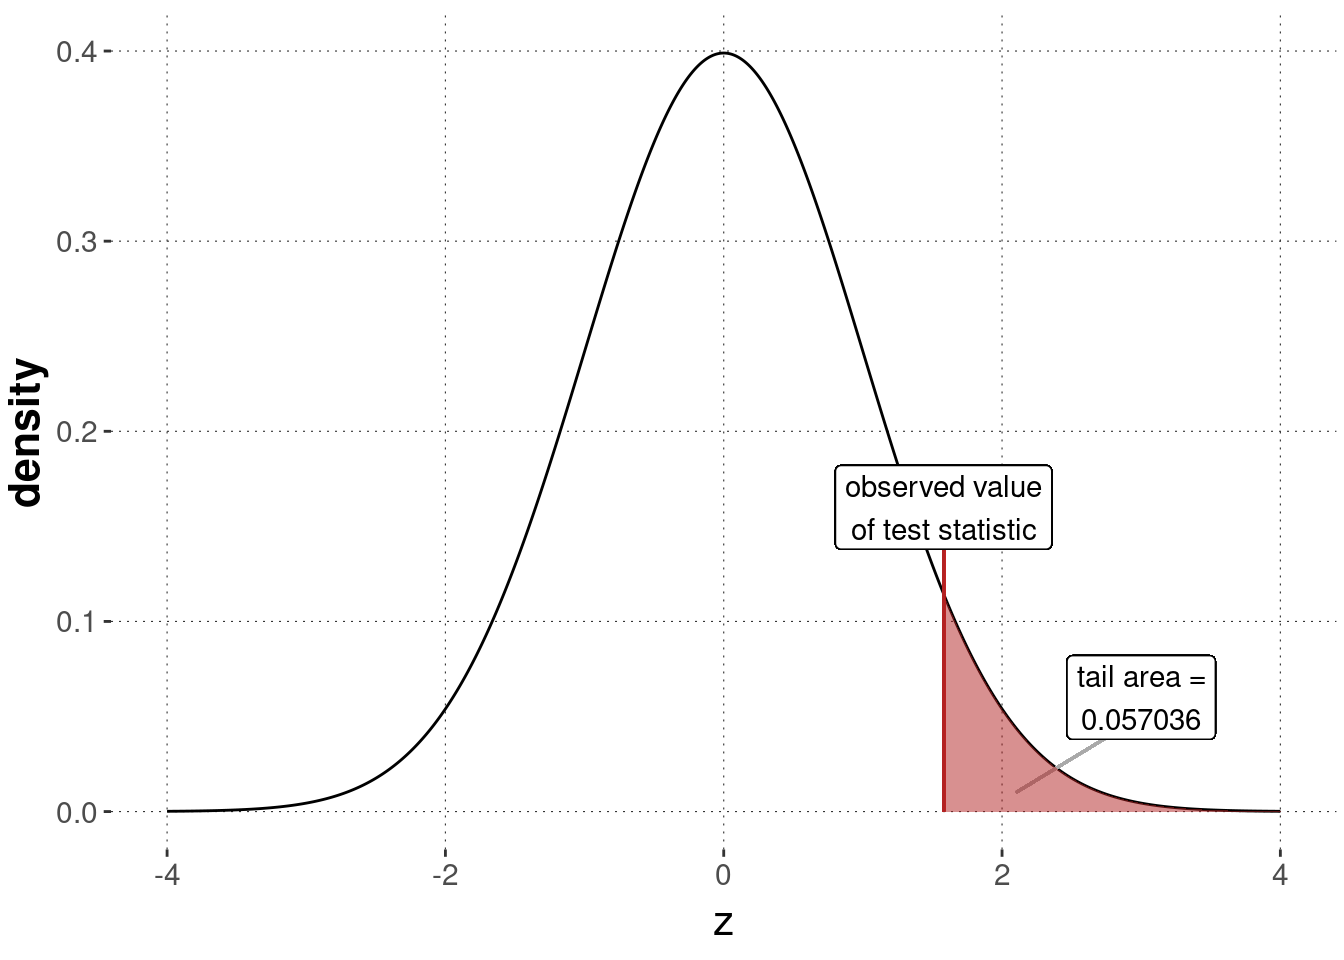 Sampling distribution for a $z$-test, testing the null hypothesis based on the assumption that the IQ-data was generated by $\mu = 100$ (with assumed/known $\sigma$).